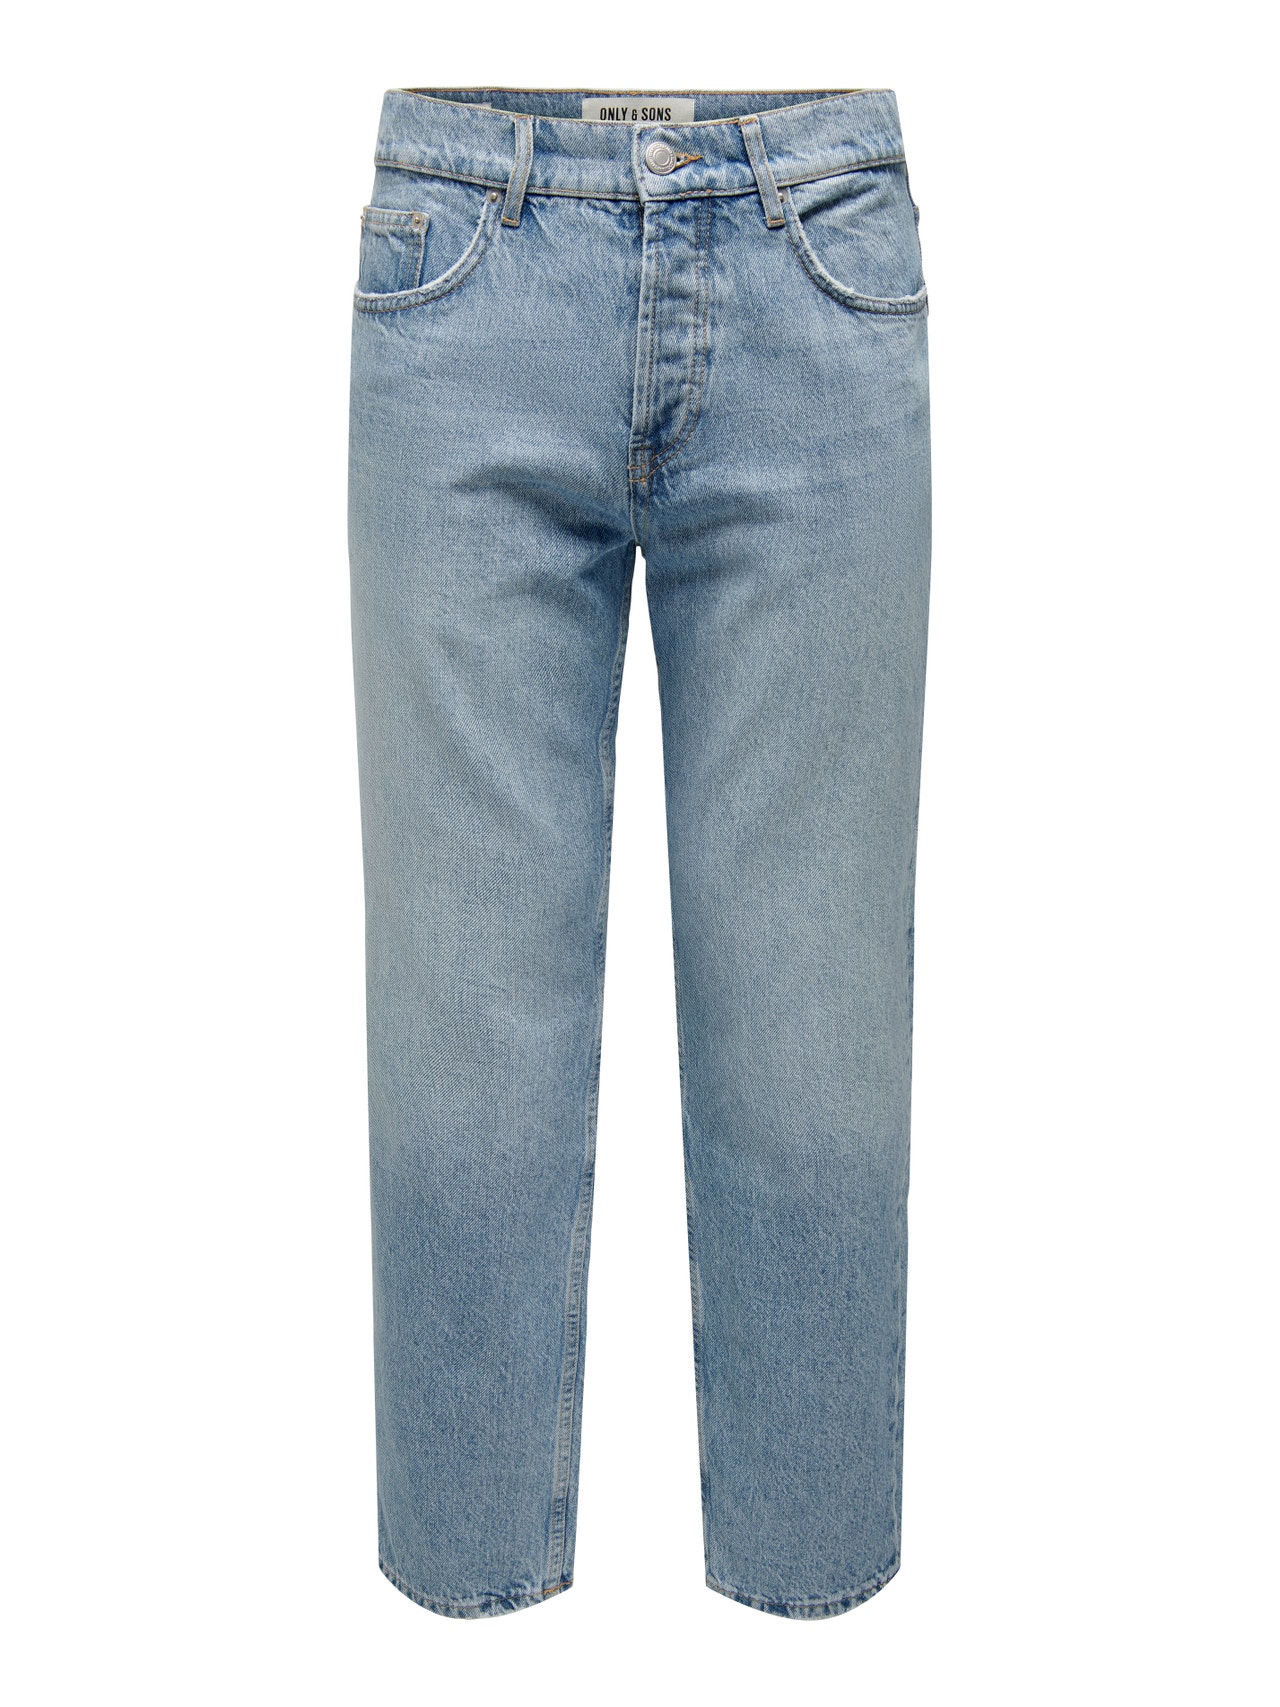 Only & Sons Edge loose fit jeans in light wash